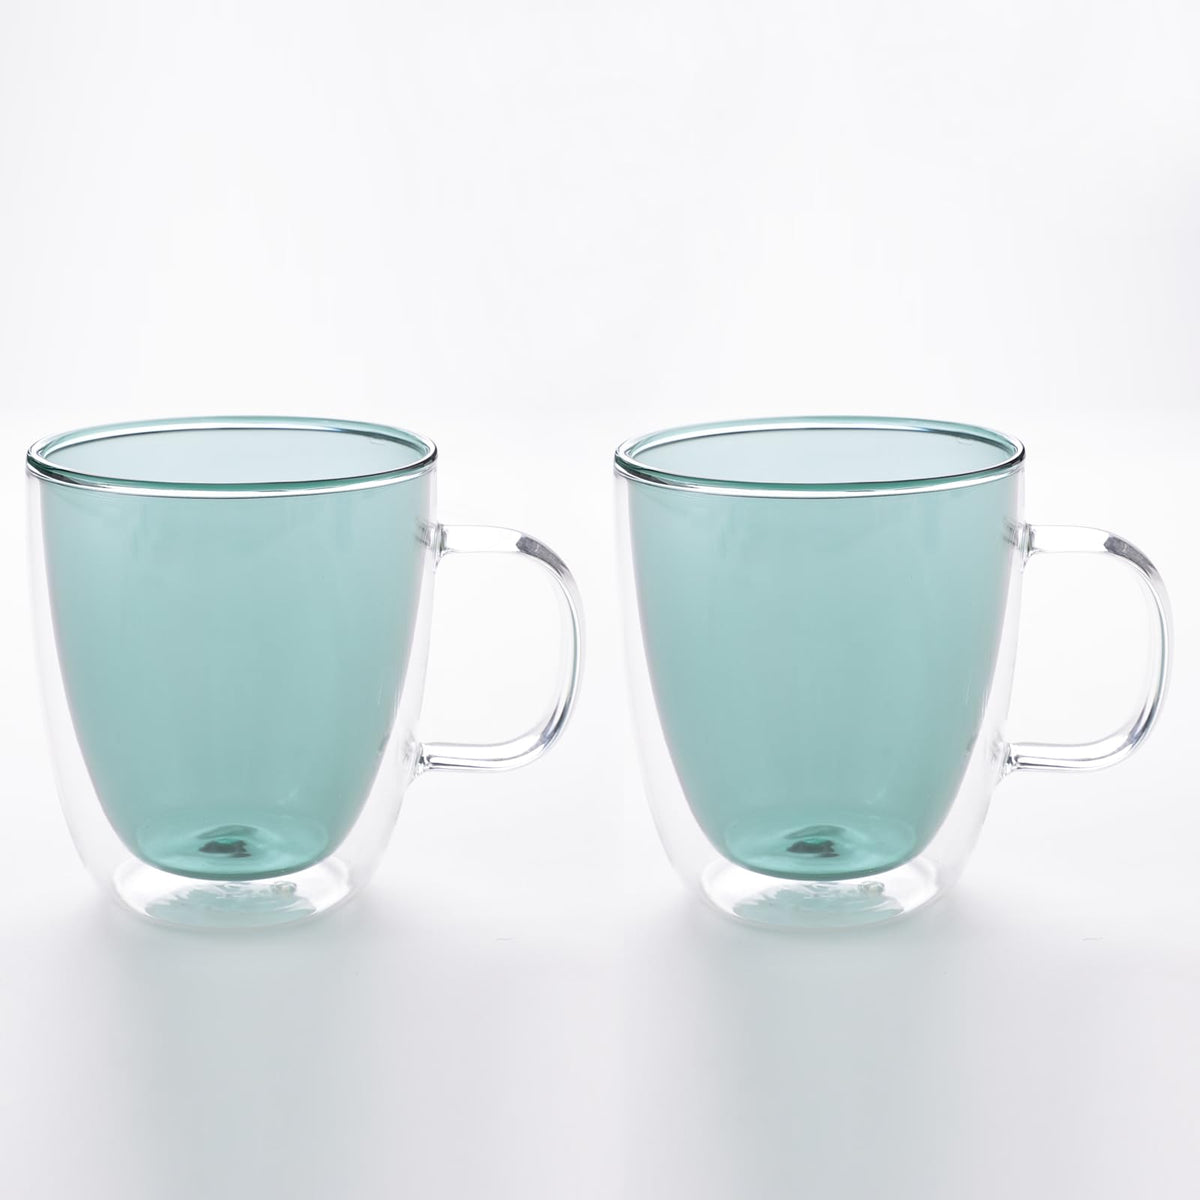 UMAI Double Walled Glass Coffee Mug Set of 2-400ml Each | Borosilicate Glass Teacups | High Thermal Resistance | Microwave & Dishwasher Safe | Gift Pack for Couples, Family and Friends | Green